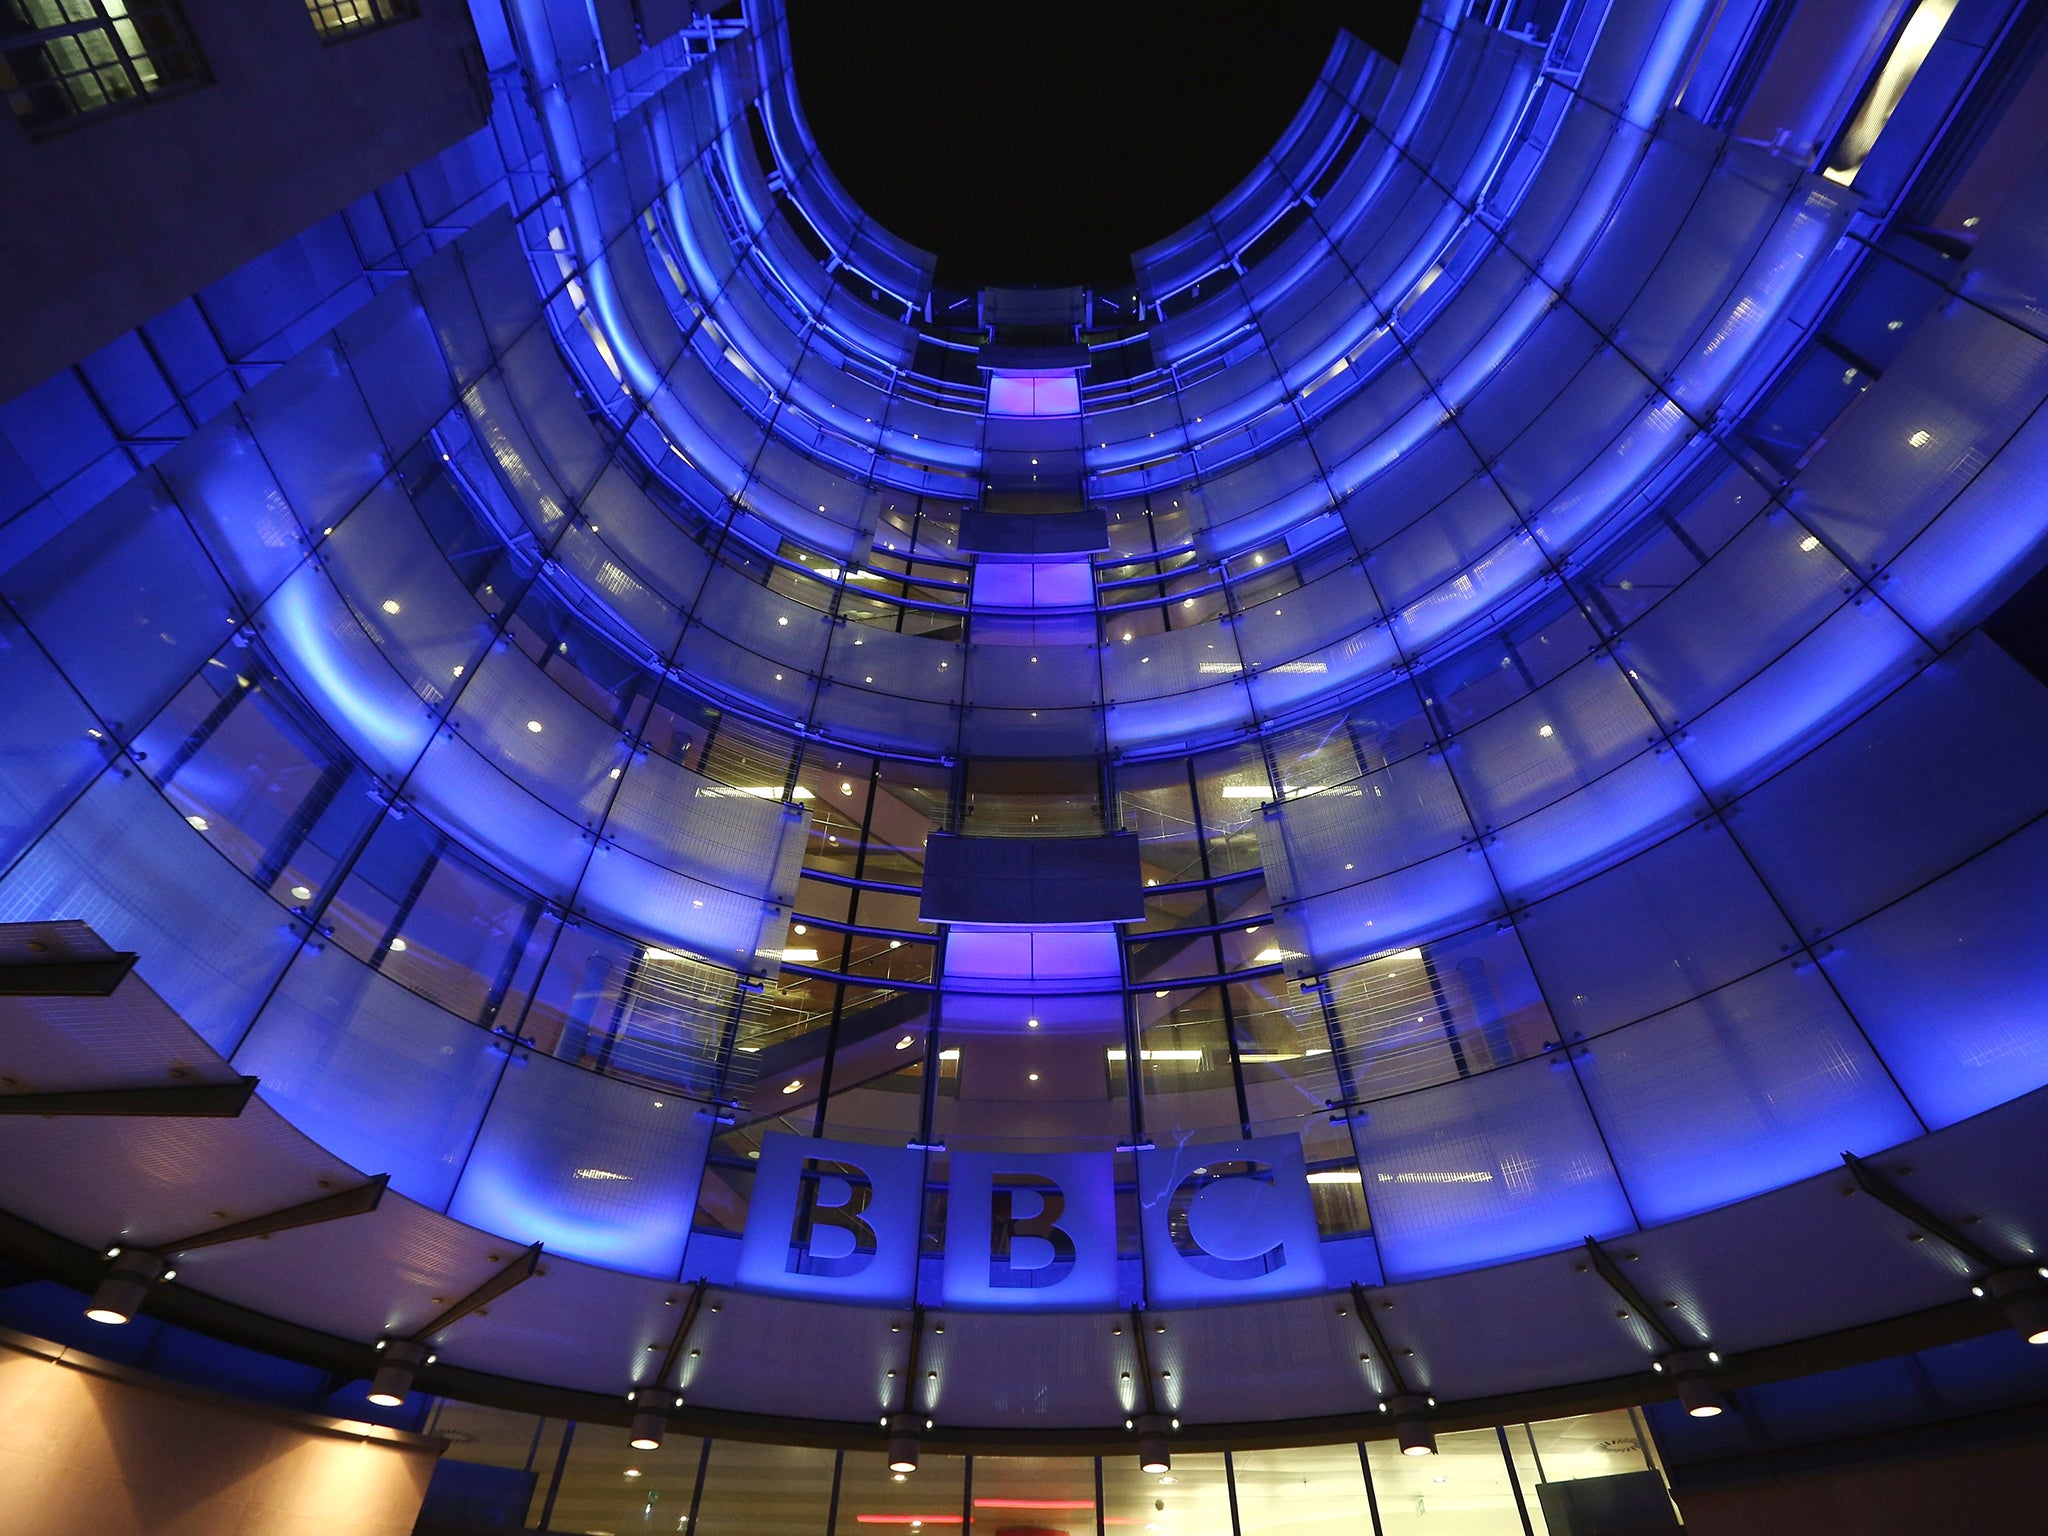 Independent production companies warned that the BBC's proposals threatened the future quality of British television